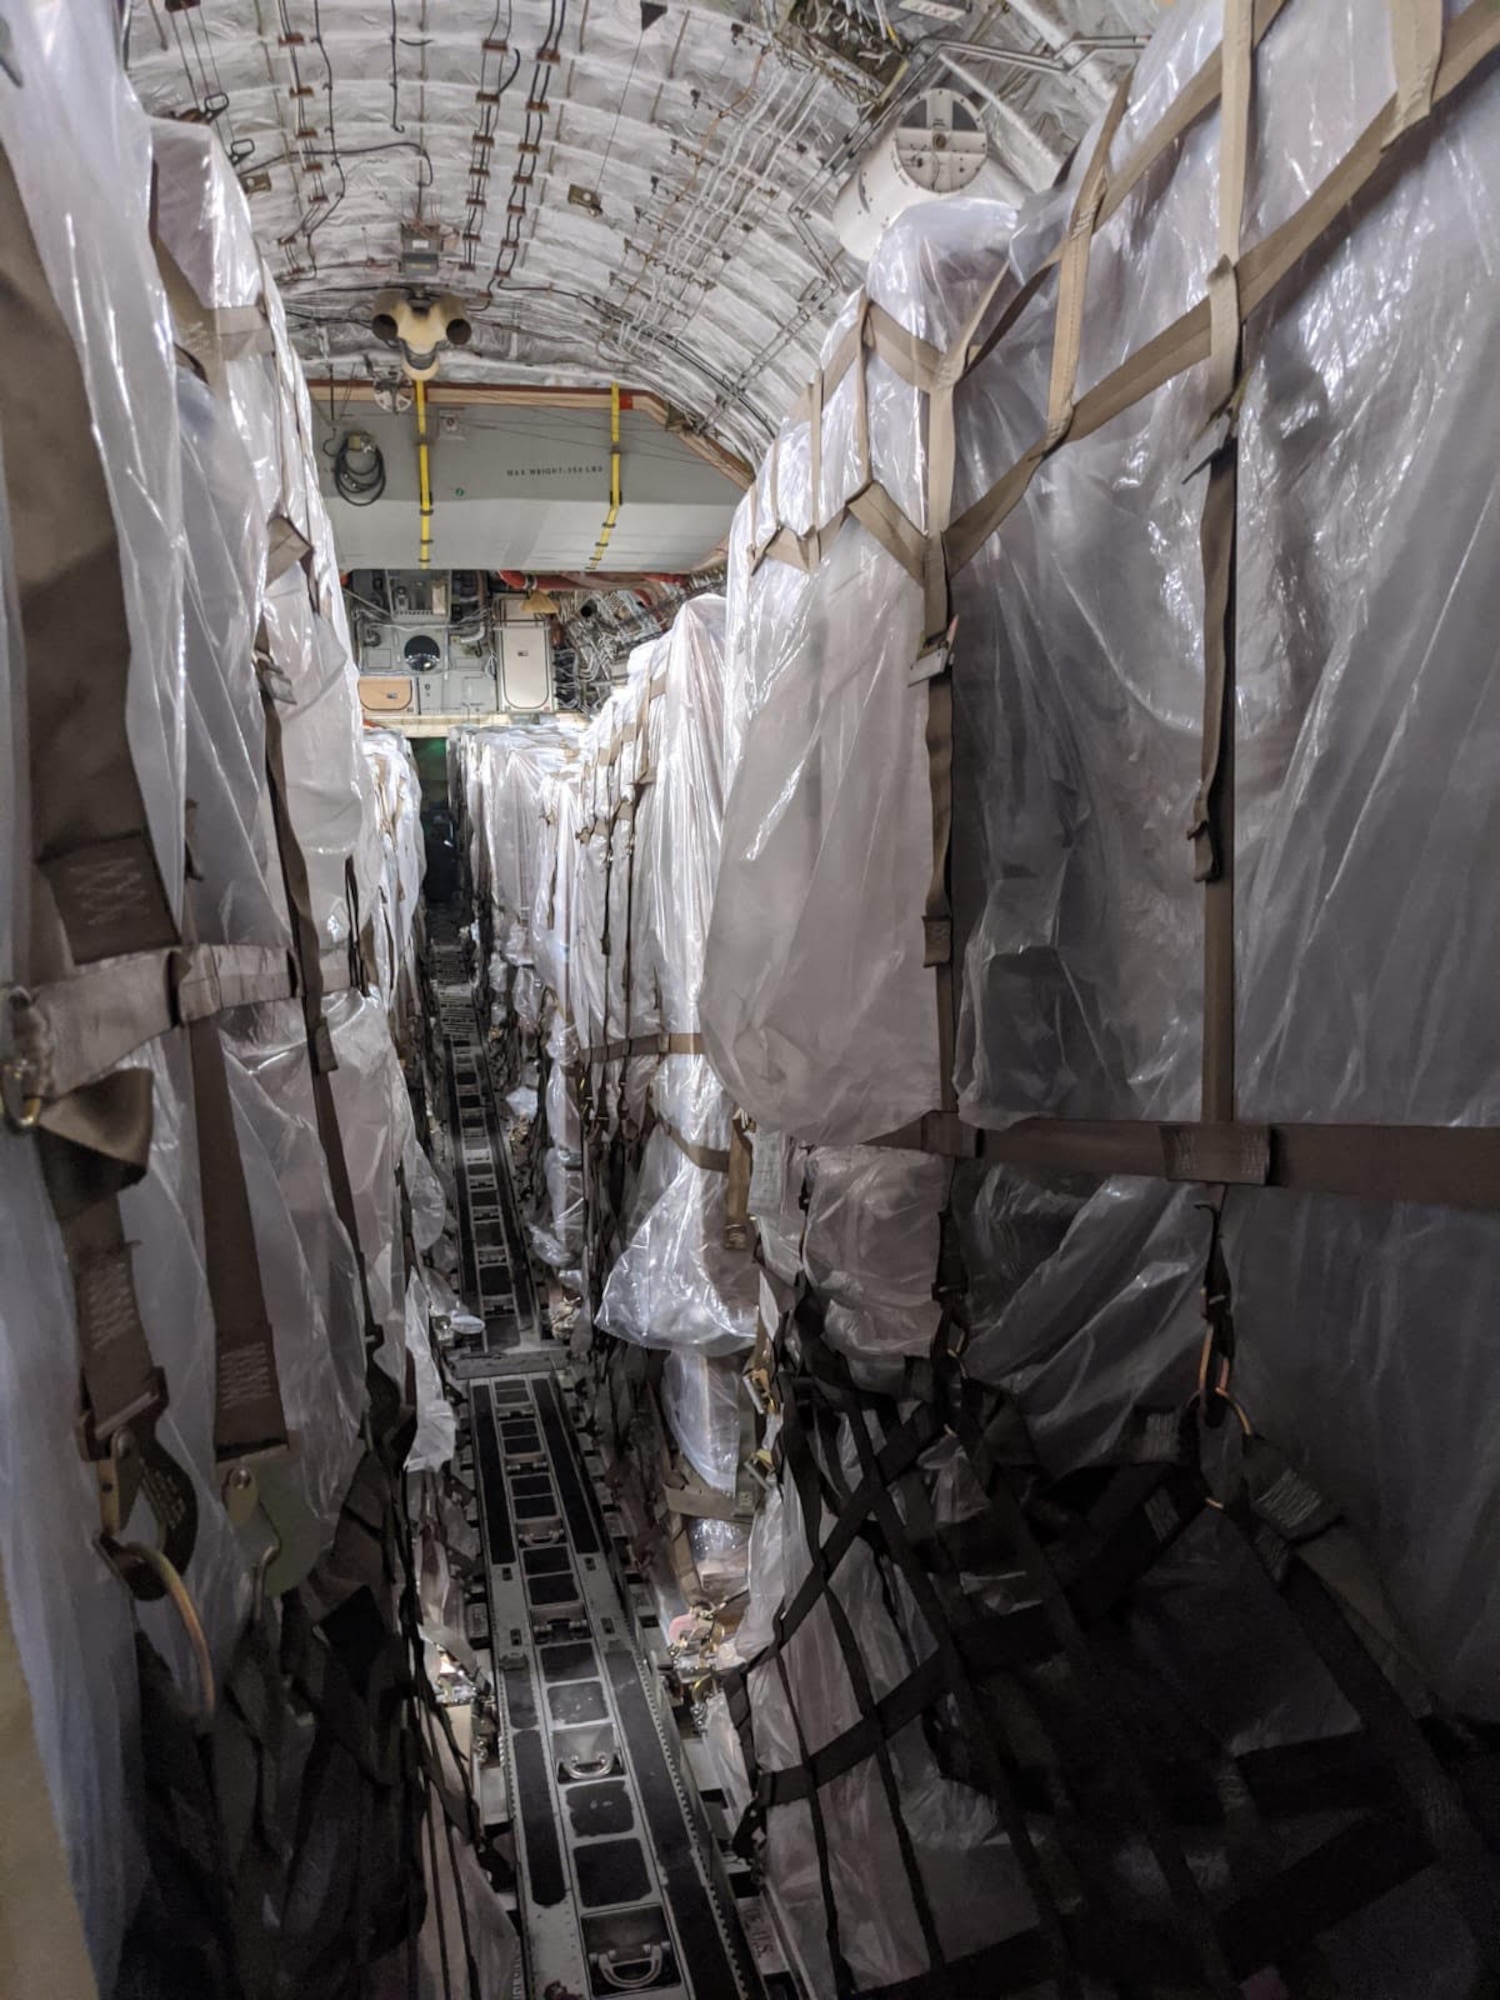 Eighteen pallets filled with more than 970,000 swab kits from Aviano, Italy are flown to to Memphis, Tennessee for distribution to various locations to be tested for the Coronavirus April 4, 2020. (Courtesy Photo)